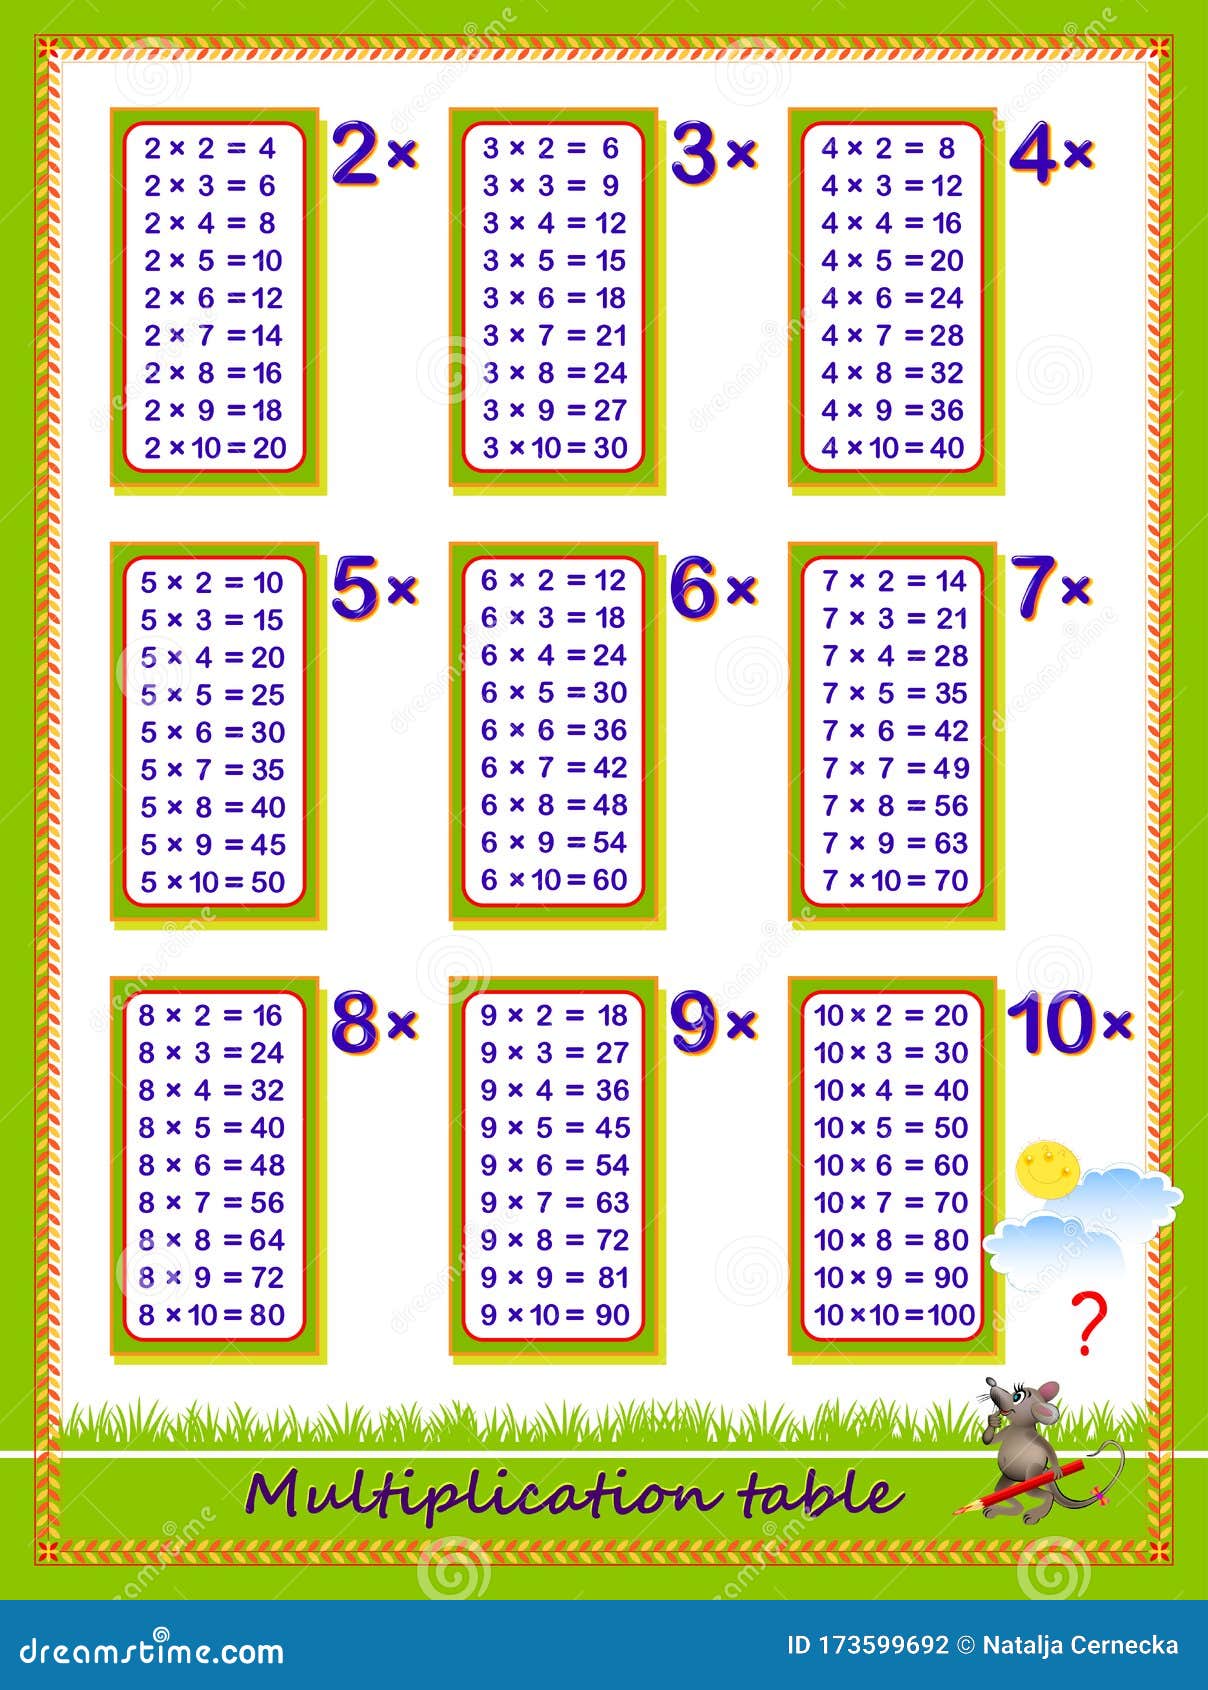 multiplication table for kids math education printable poster for